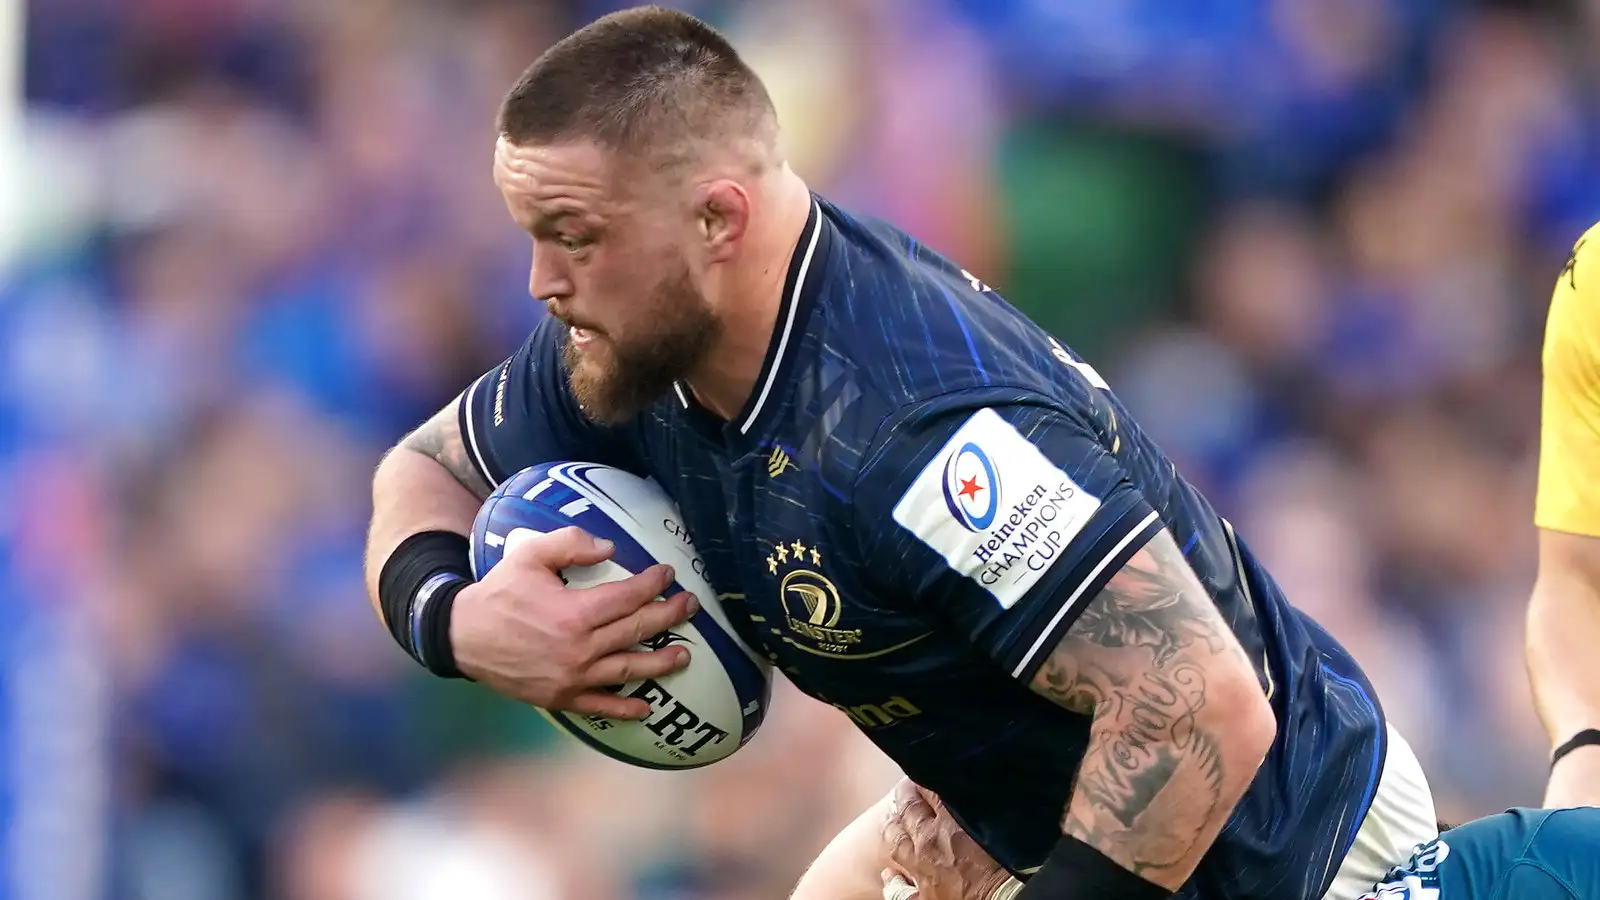 United Rugby Championship: 100 up for Leinster prop Andrew Porter while Shane Daly starts at 15 for Munster